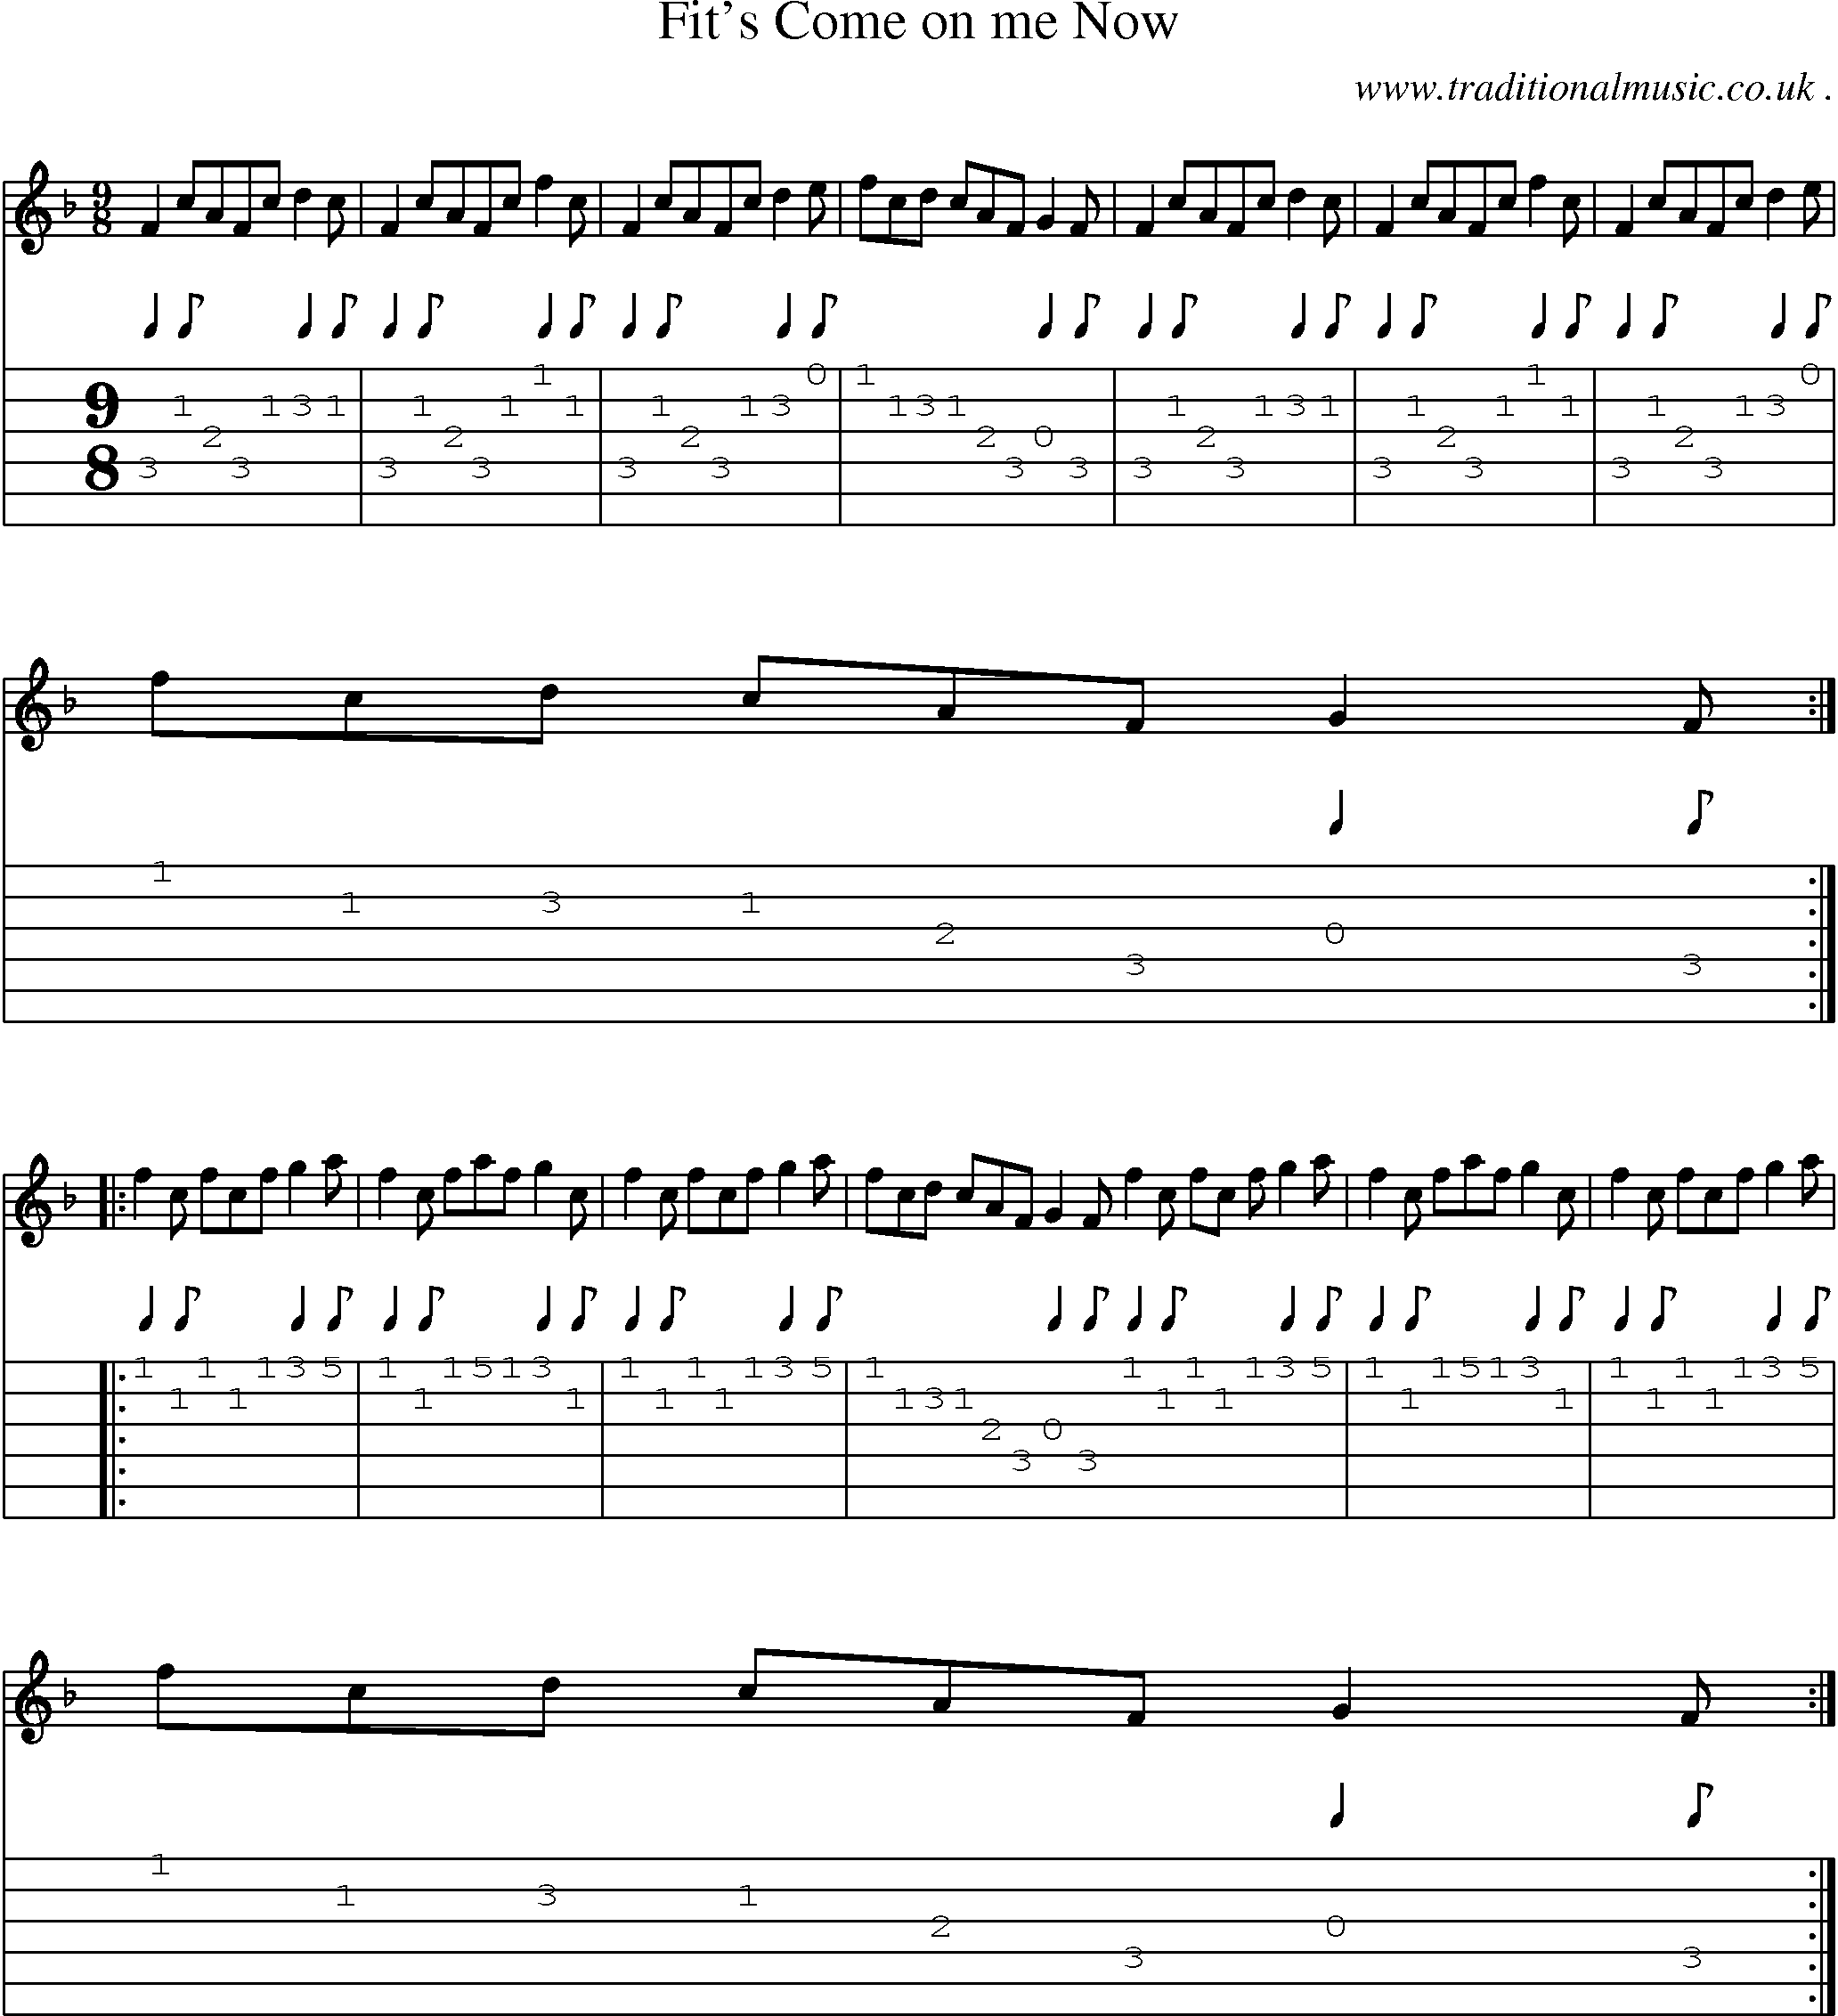 Sheet-Music and Guitar Tabs for Fits Come On Me Now